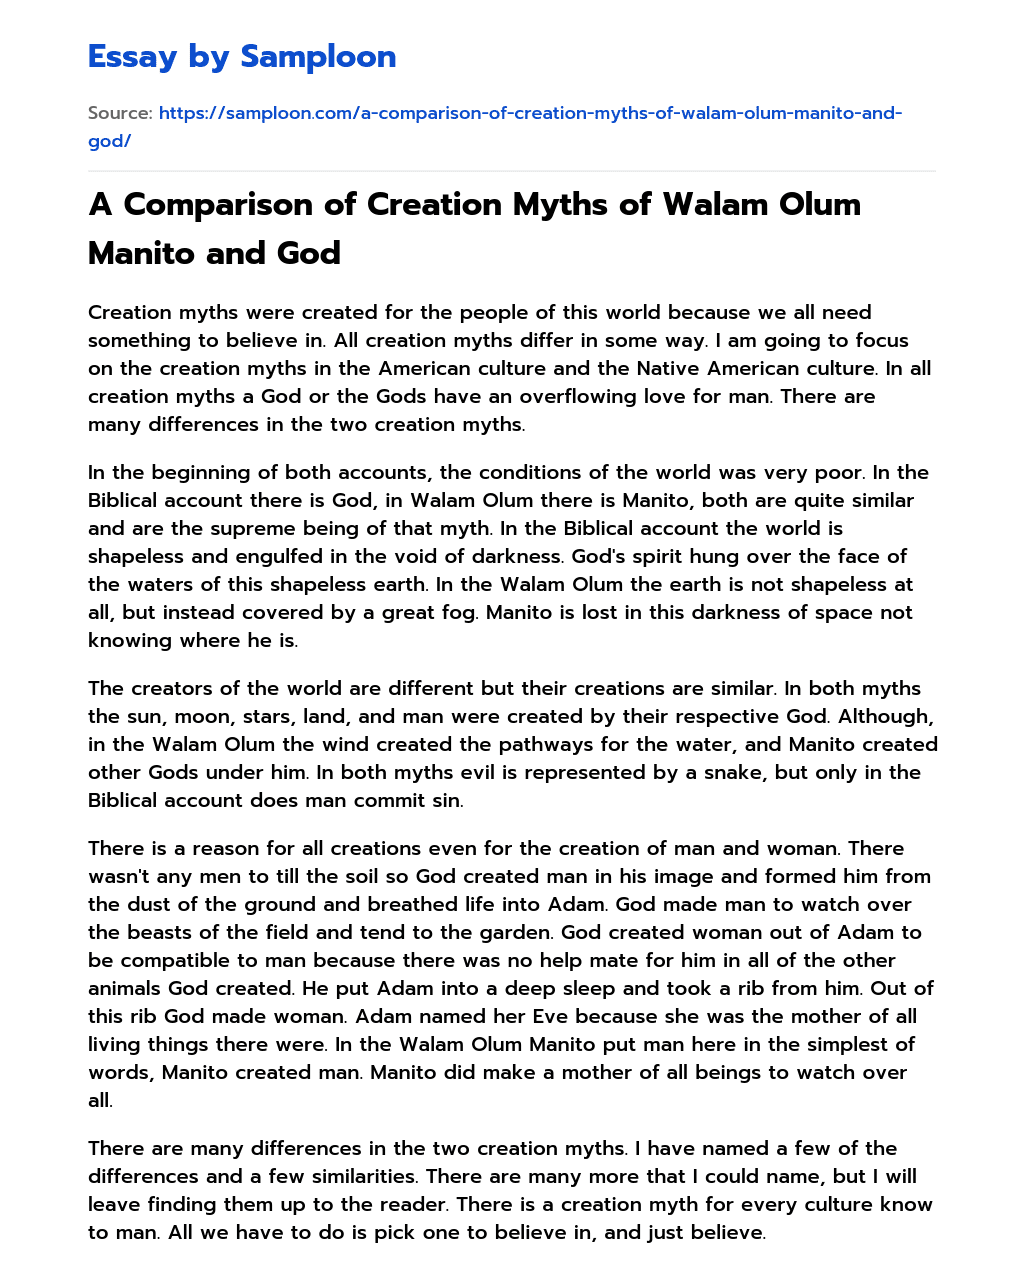 A Comparison of Creation Myths of Walam Olum Manito and God essay